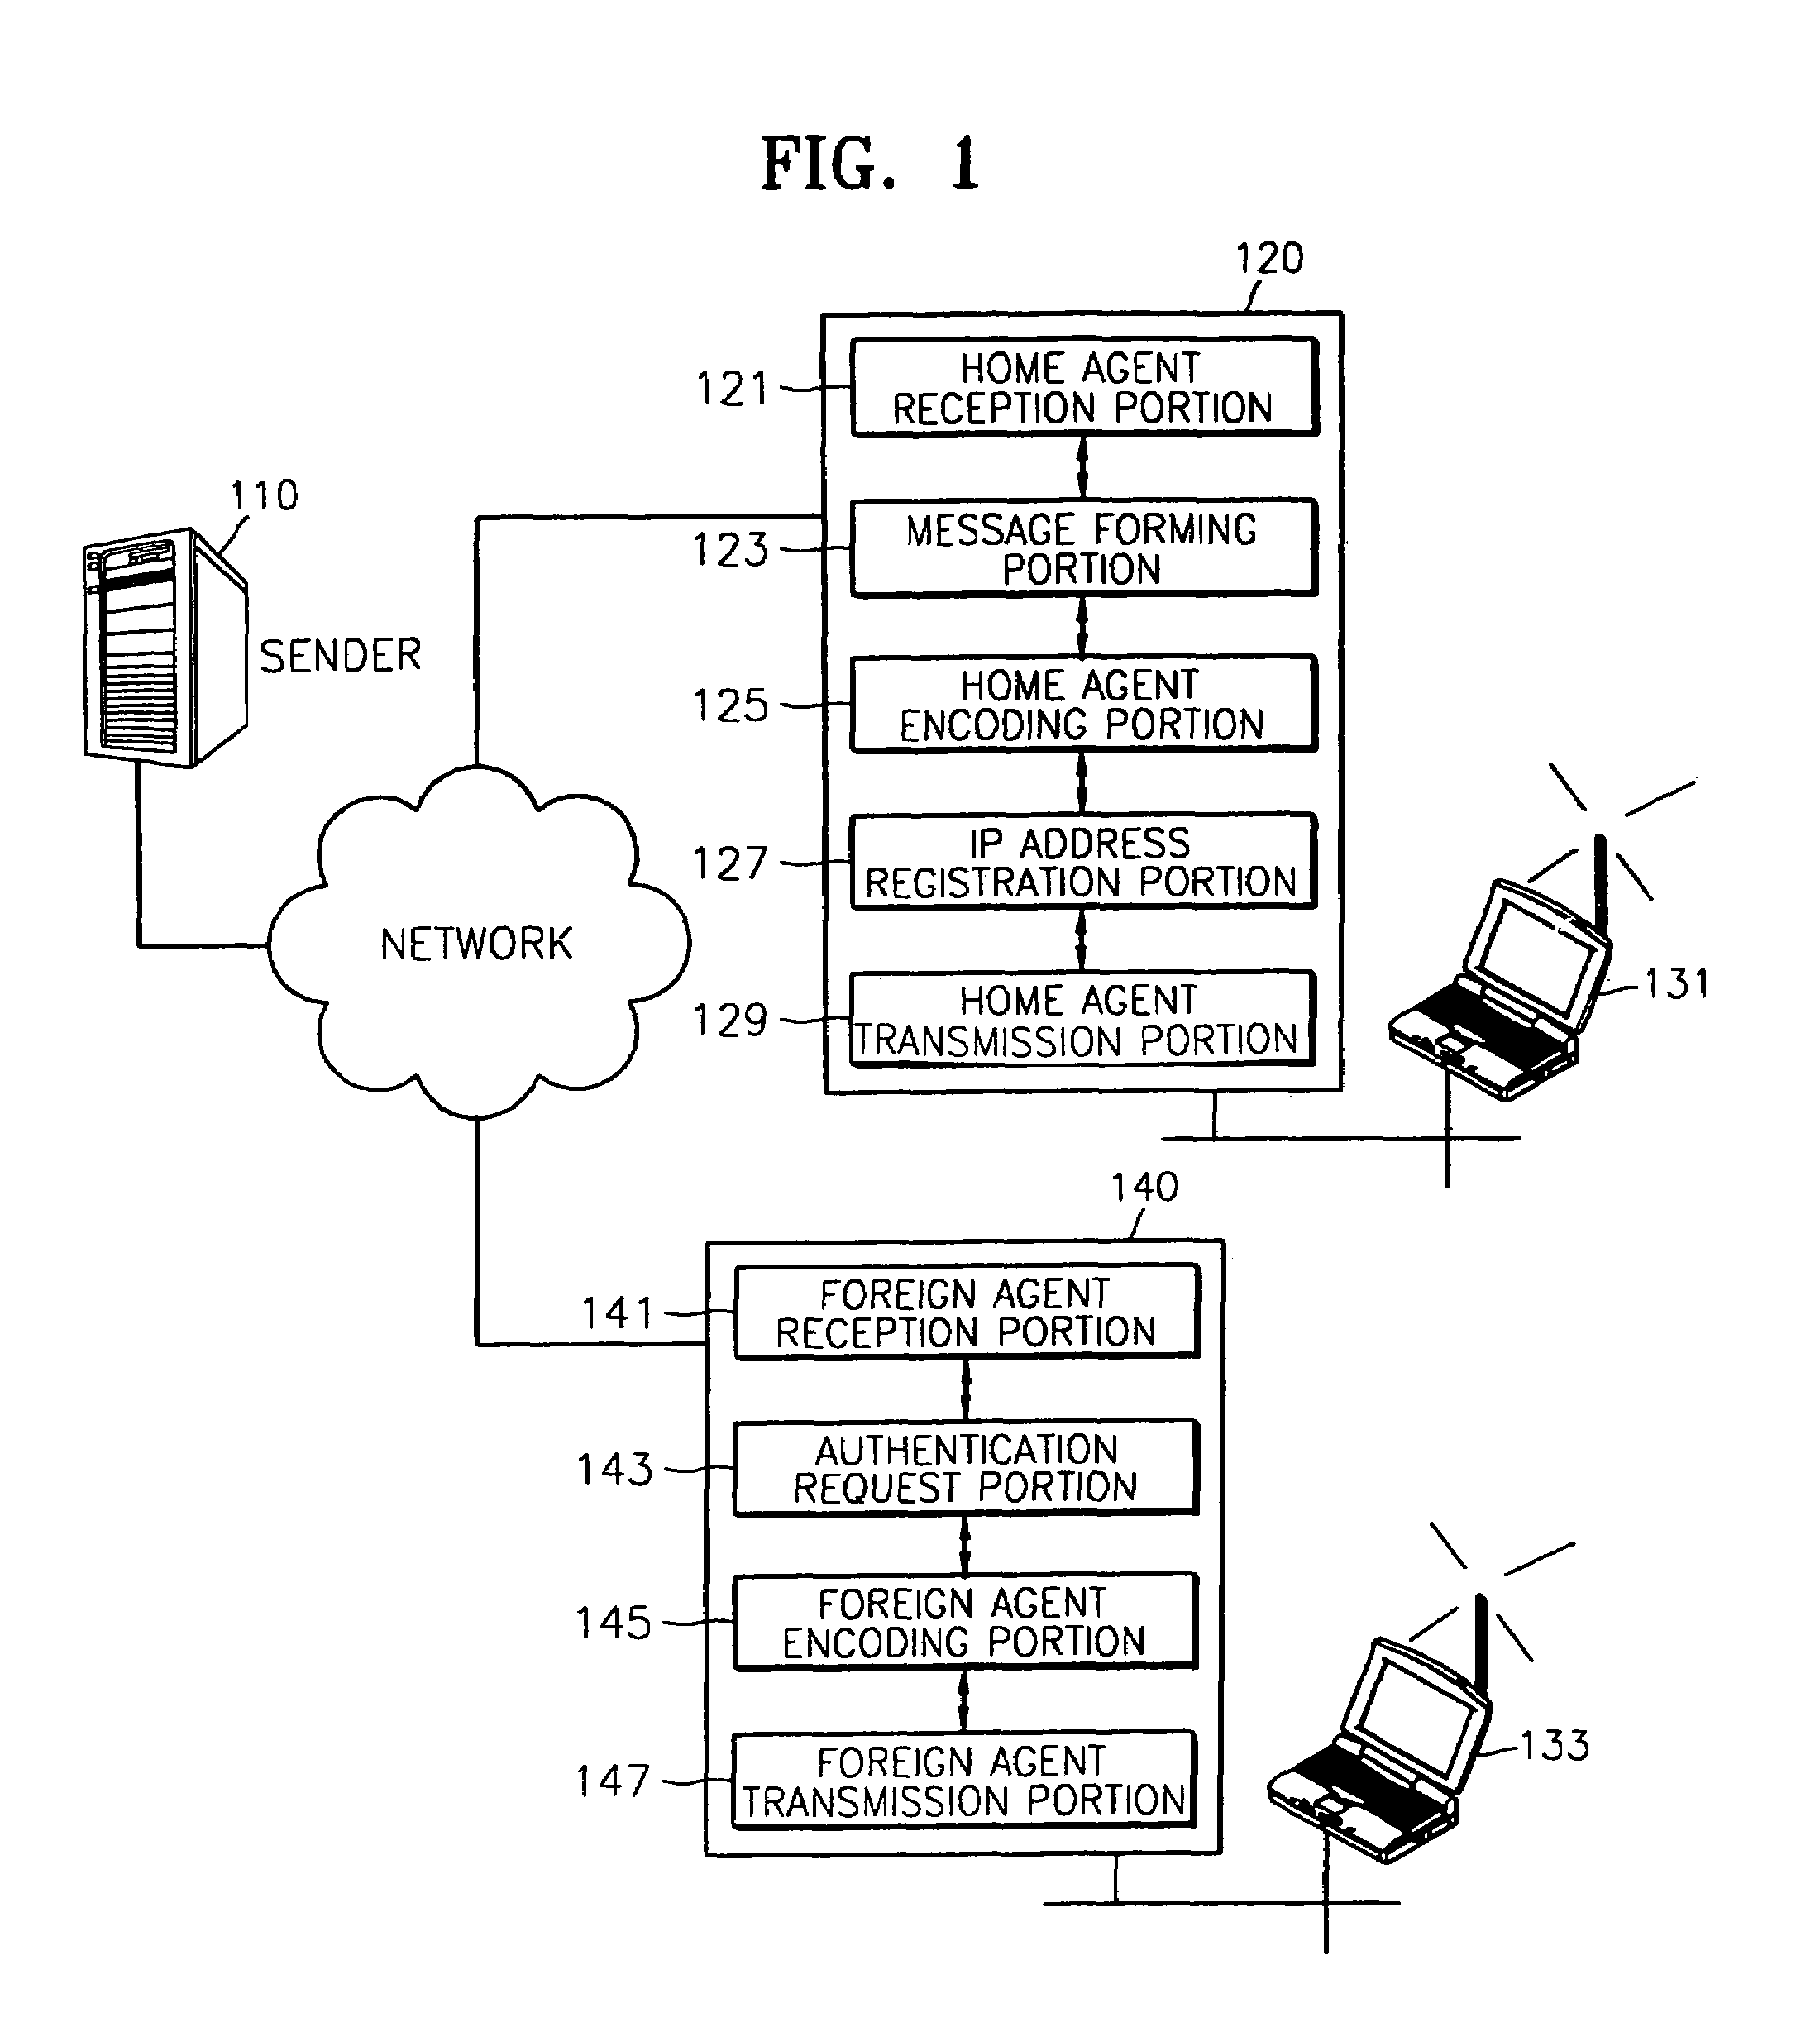 Method and apparatus for assigning IP address using agent in zero configuration network